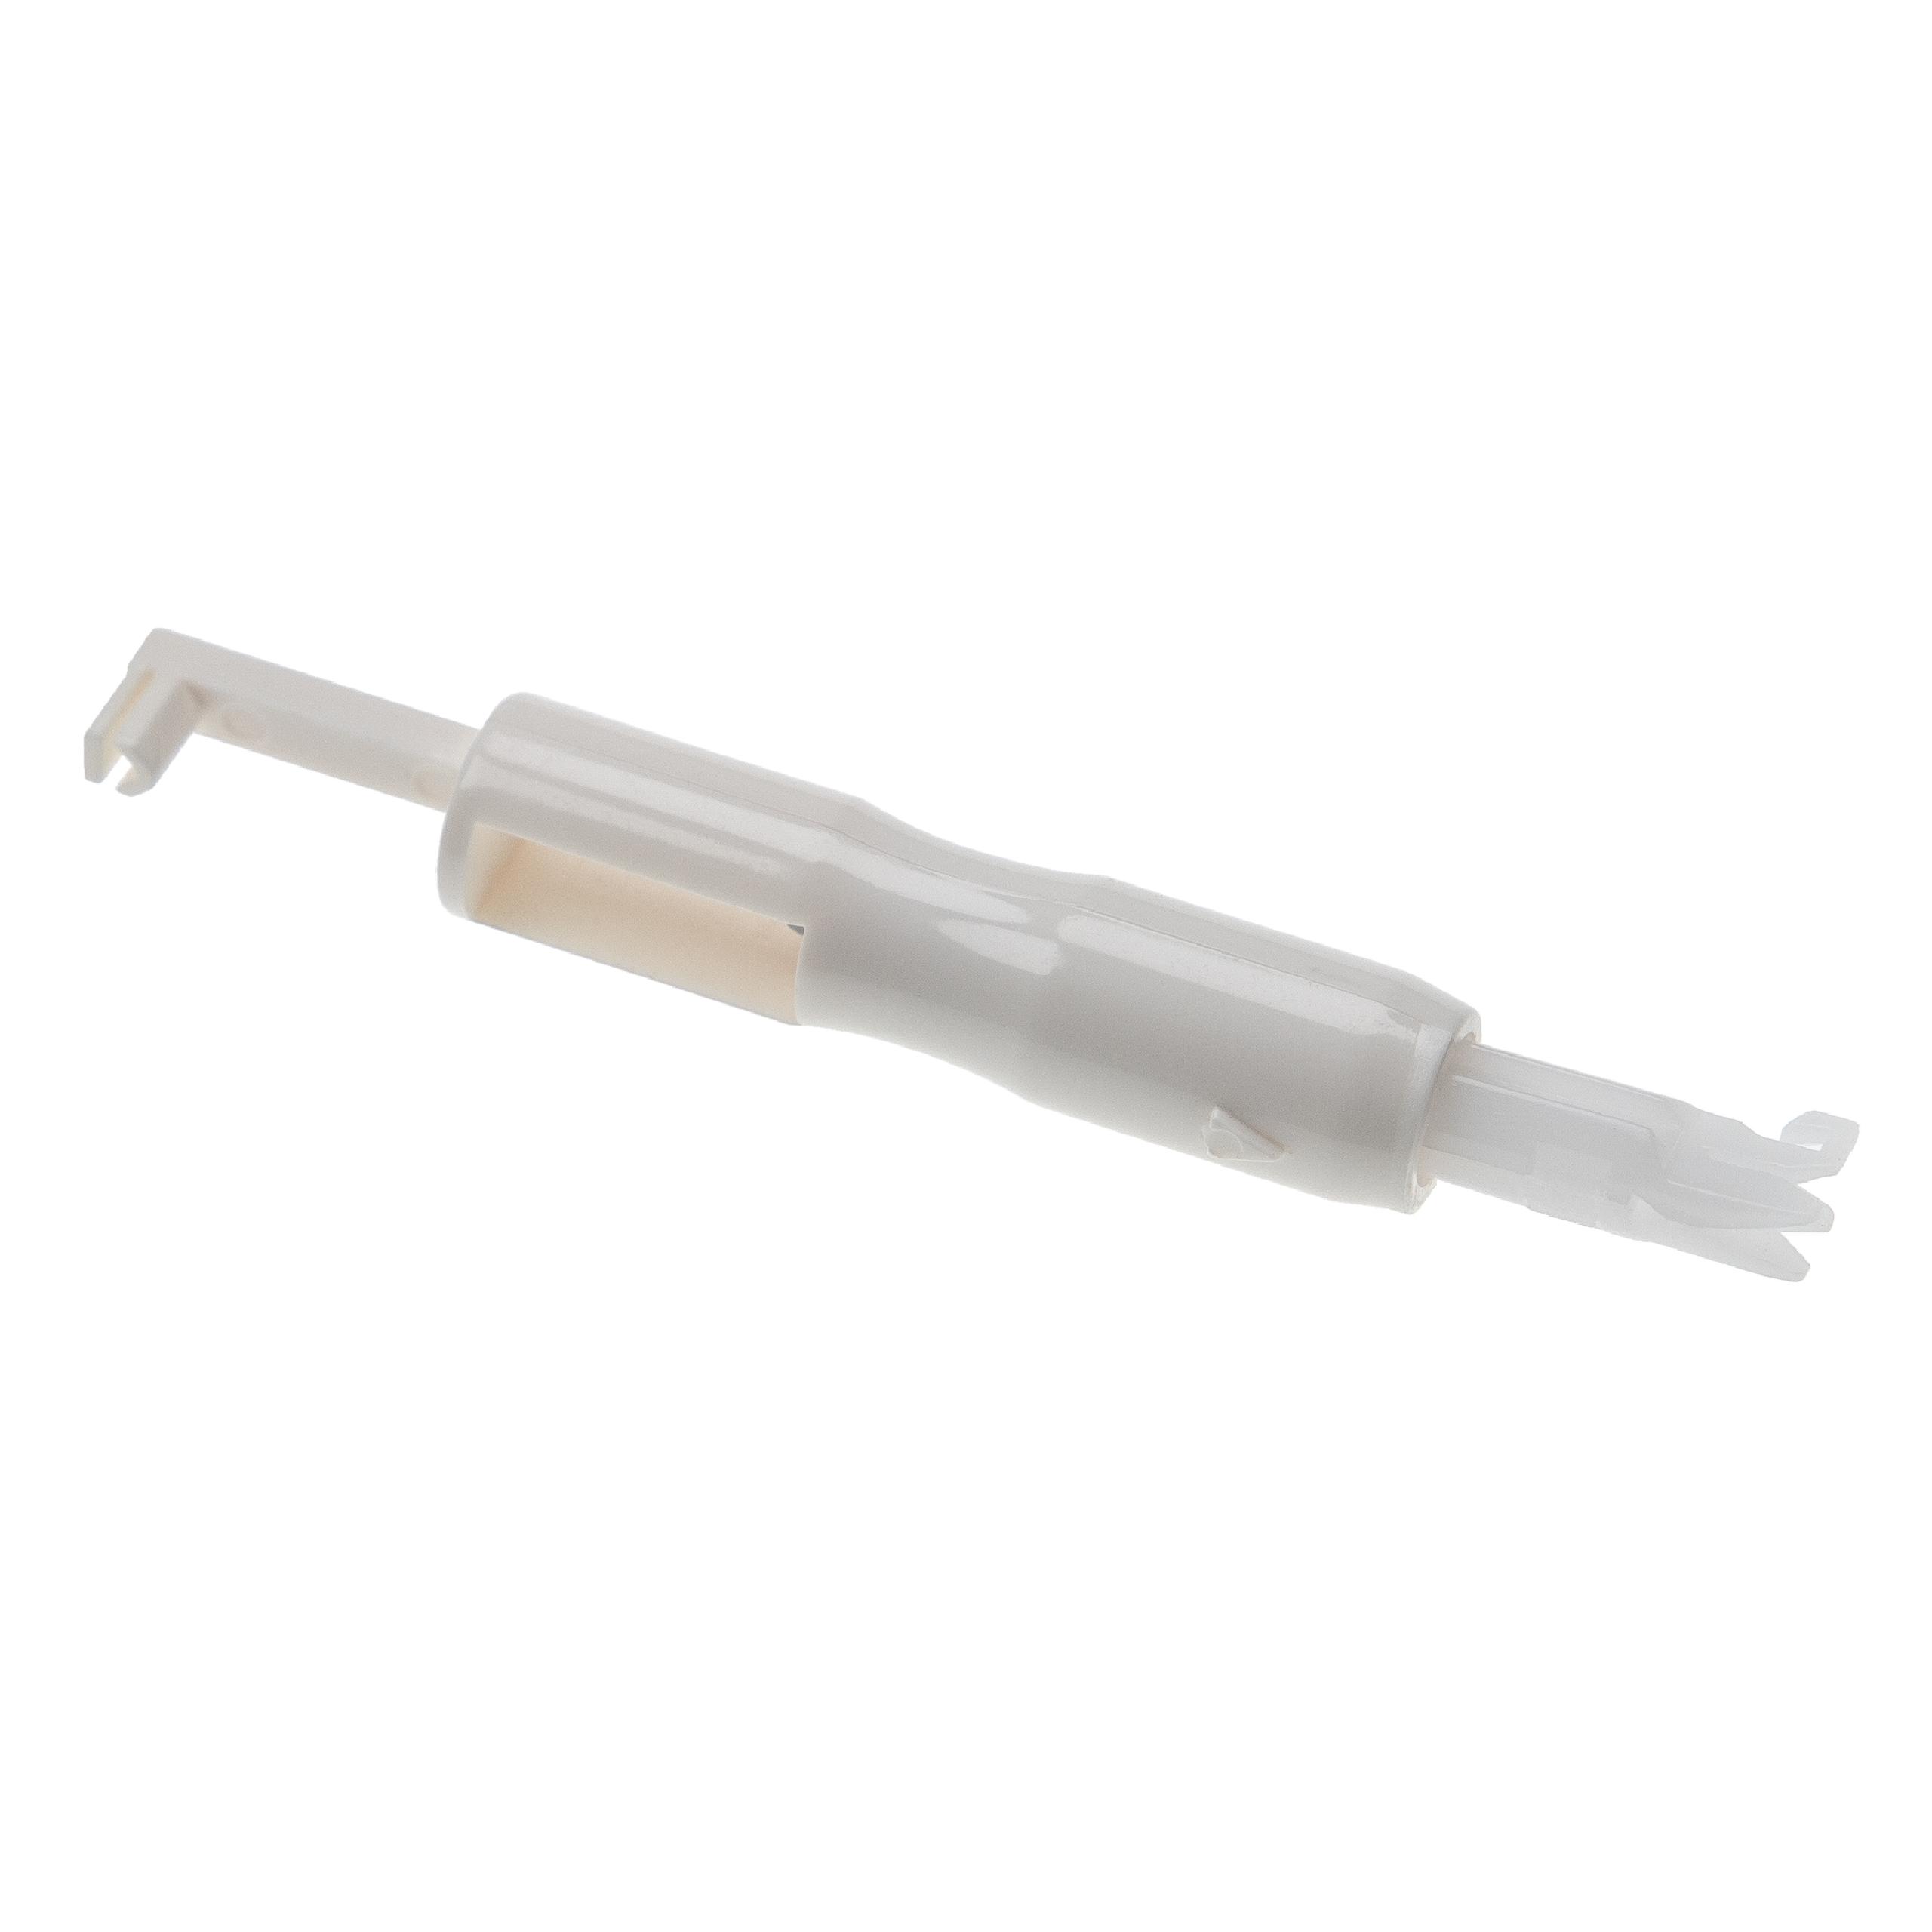 vhbw Needle Threader for Domestic Sewing Machines - Plastic, Length 7 cm White